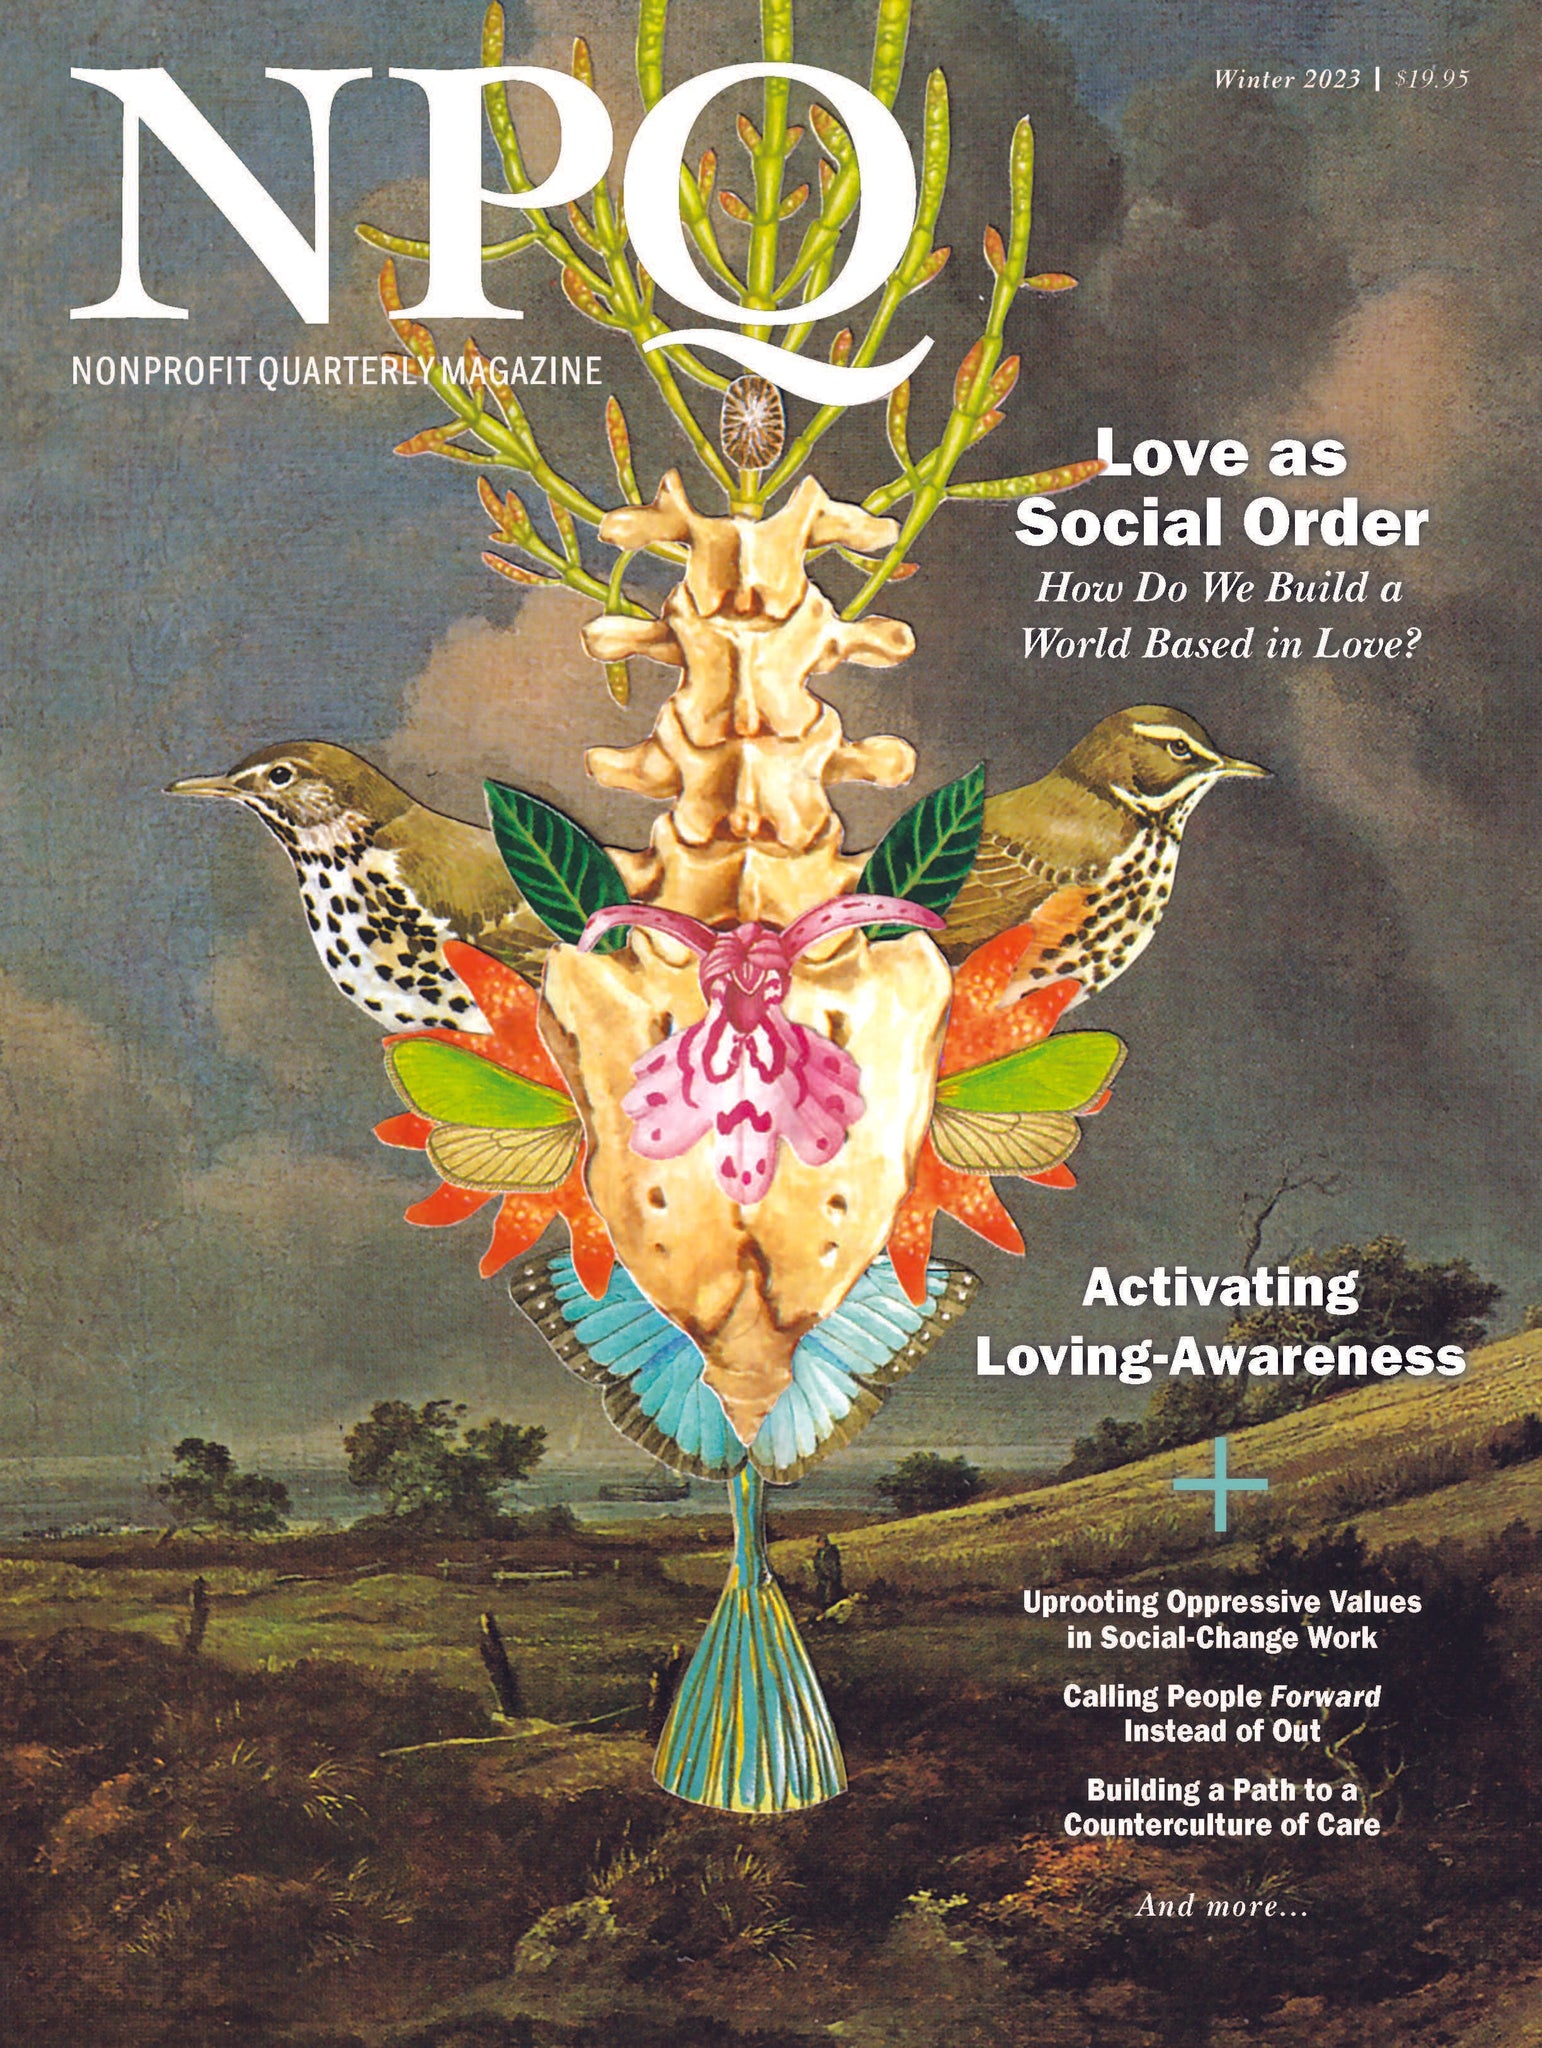 Love as Social Order: How Do We Build a World Based in Love? (Winter 2023, Print Issue)